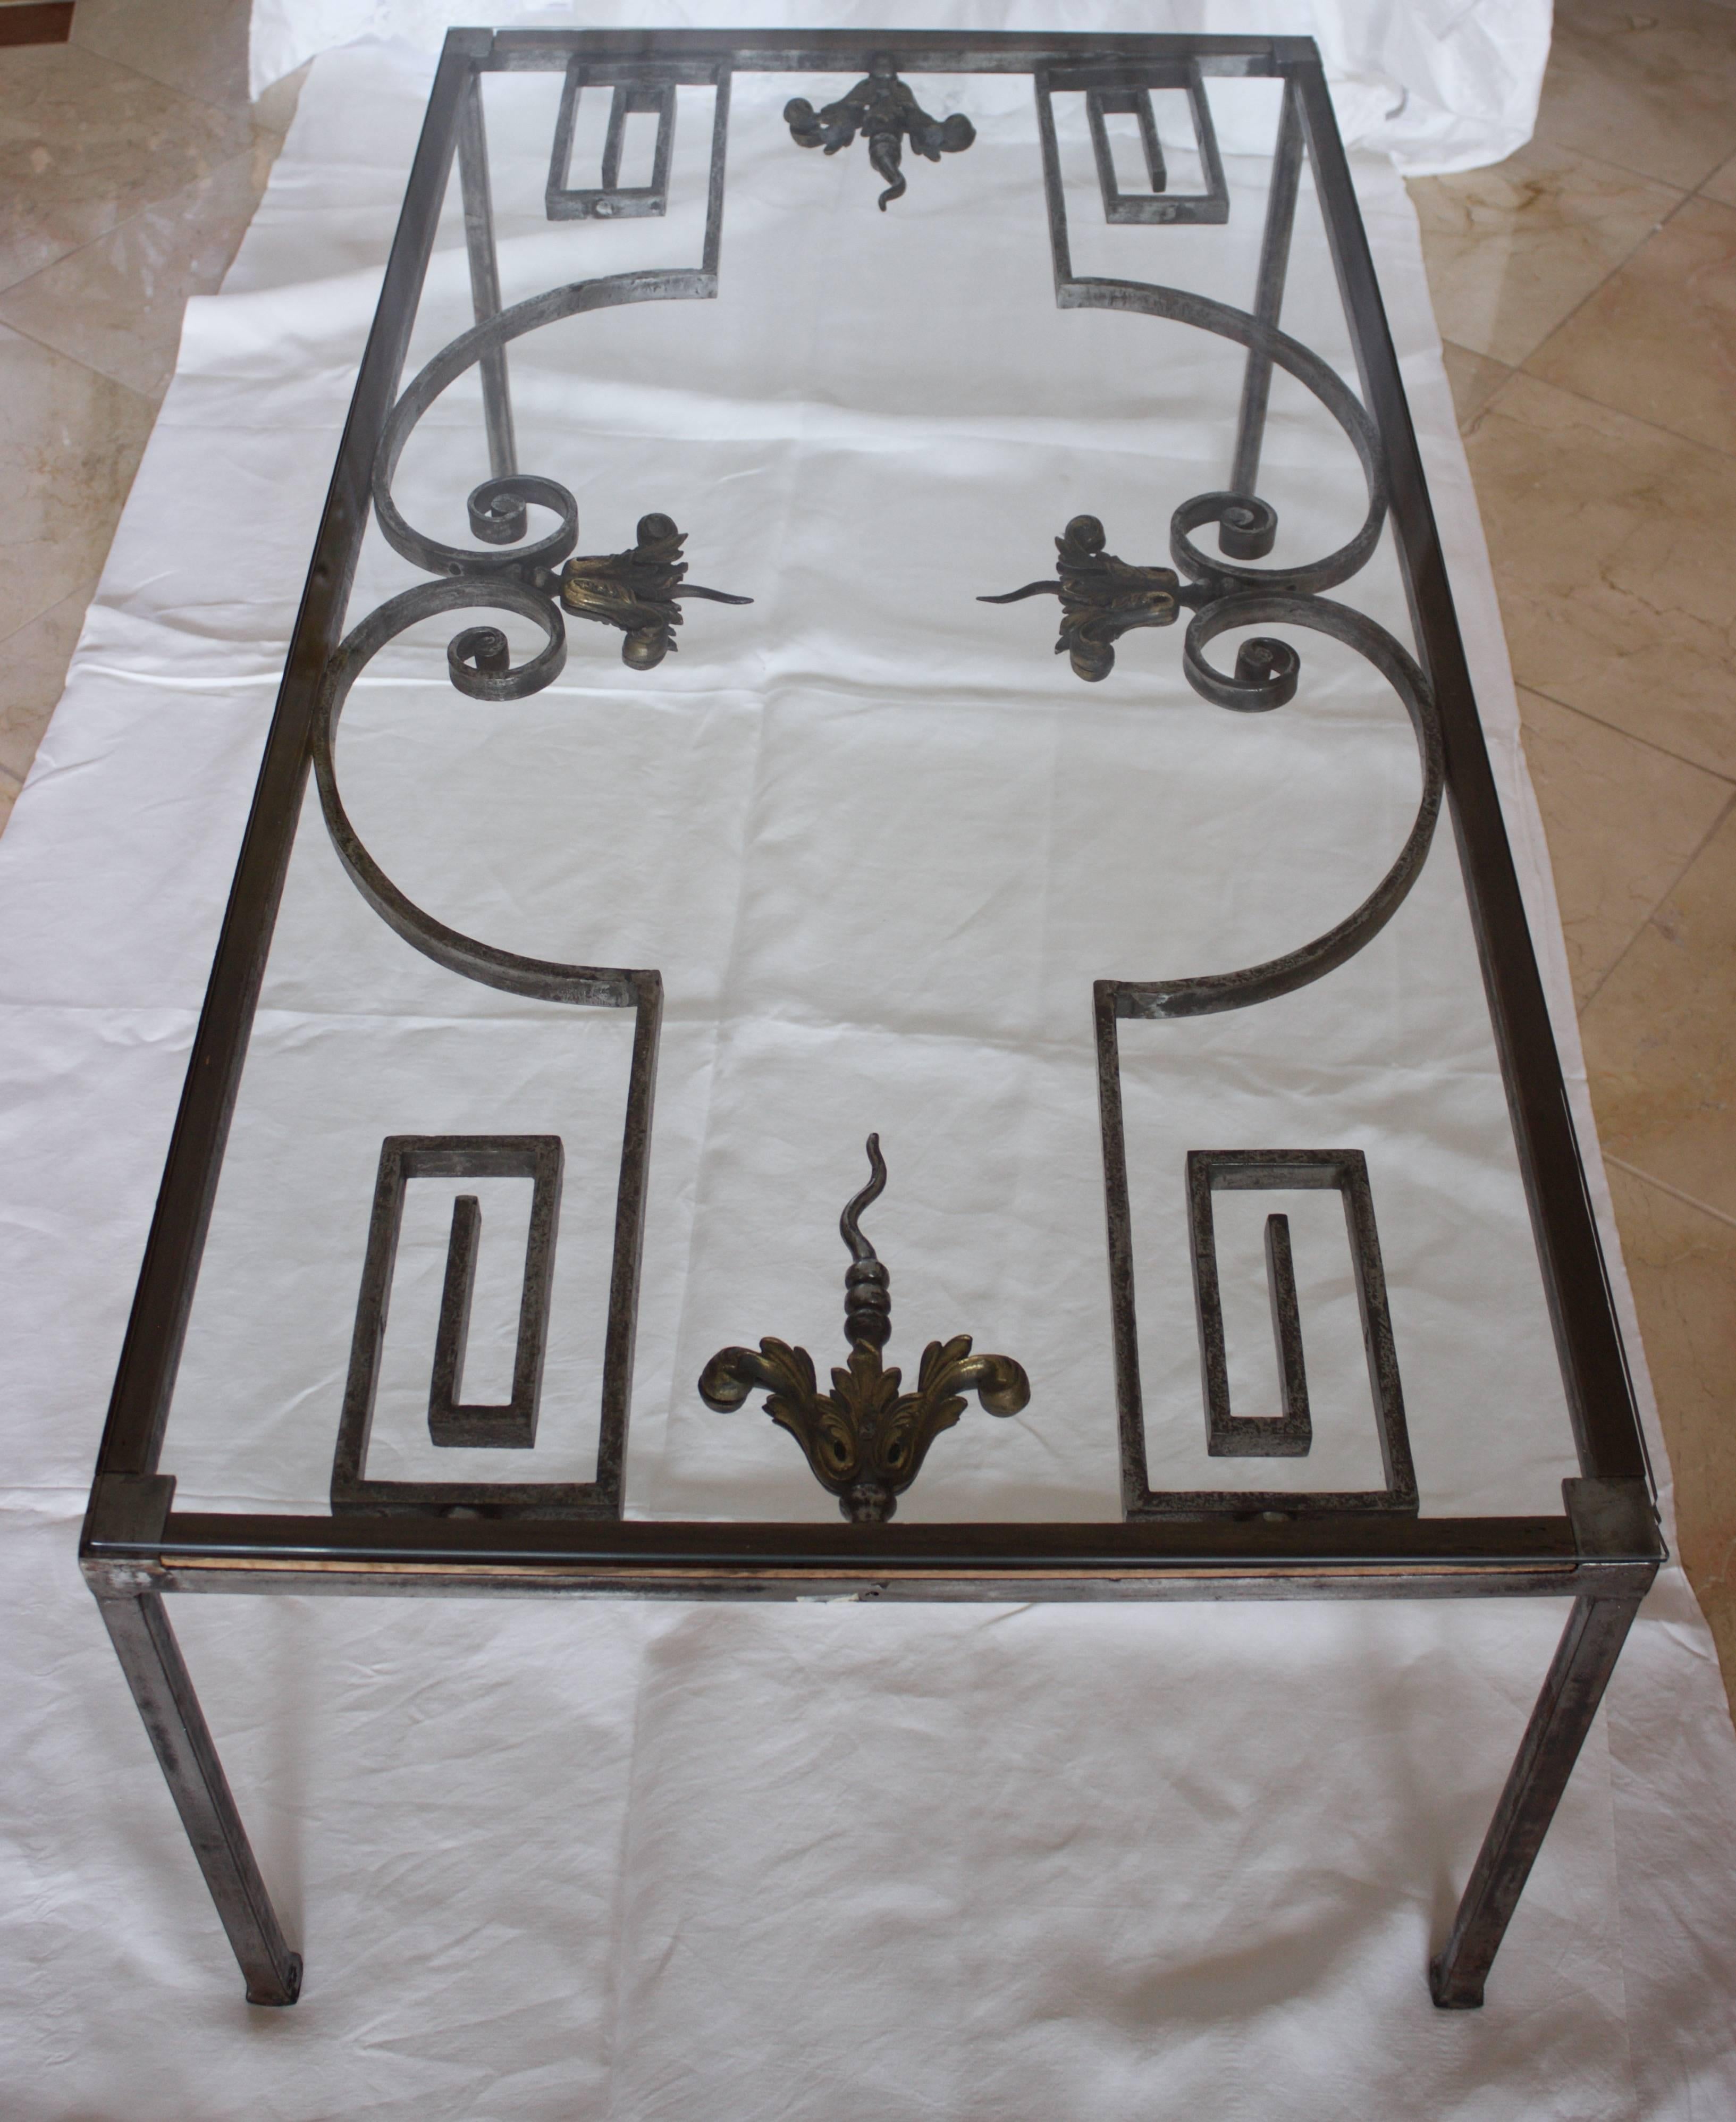 Outstanding table made of hand forged steel and cast bronzes from a 19th century French gate. The legs in forged steel as well were a later addition skillfully done. Fully covered by a glass panel -.25